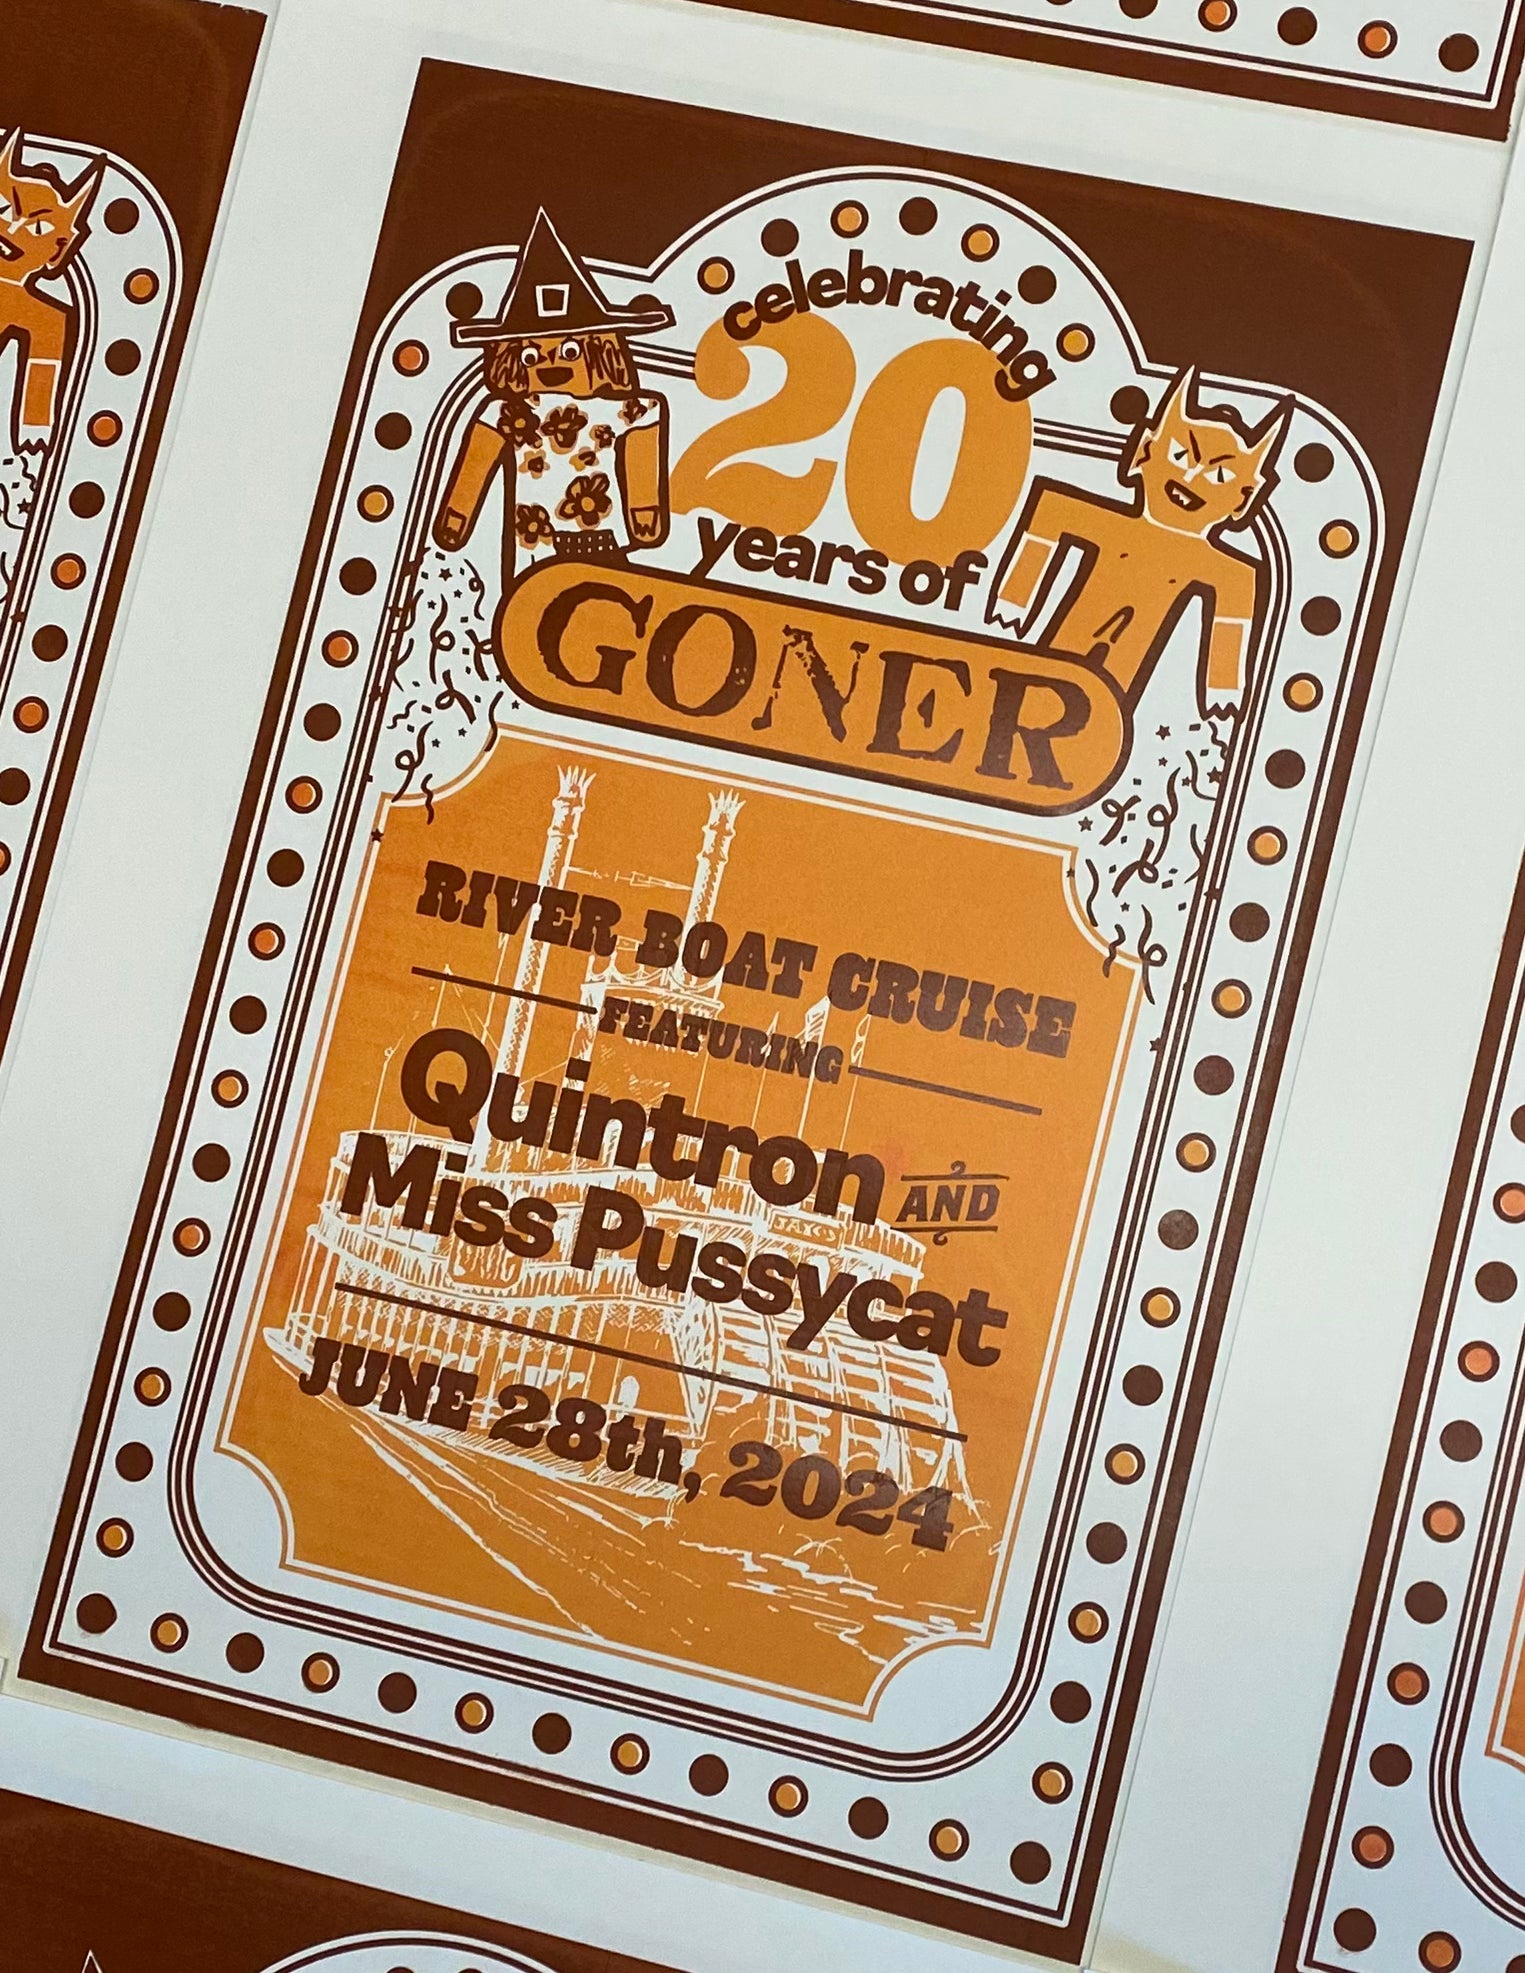 QUINTRON RIVERBOAT CRUISE / Goner 20th Birthday Celebration Poster By Sara Moseley - SHIPPED